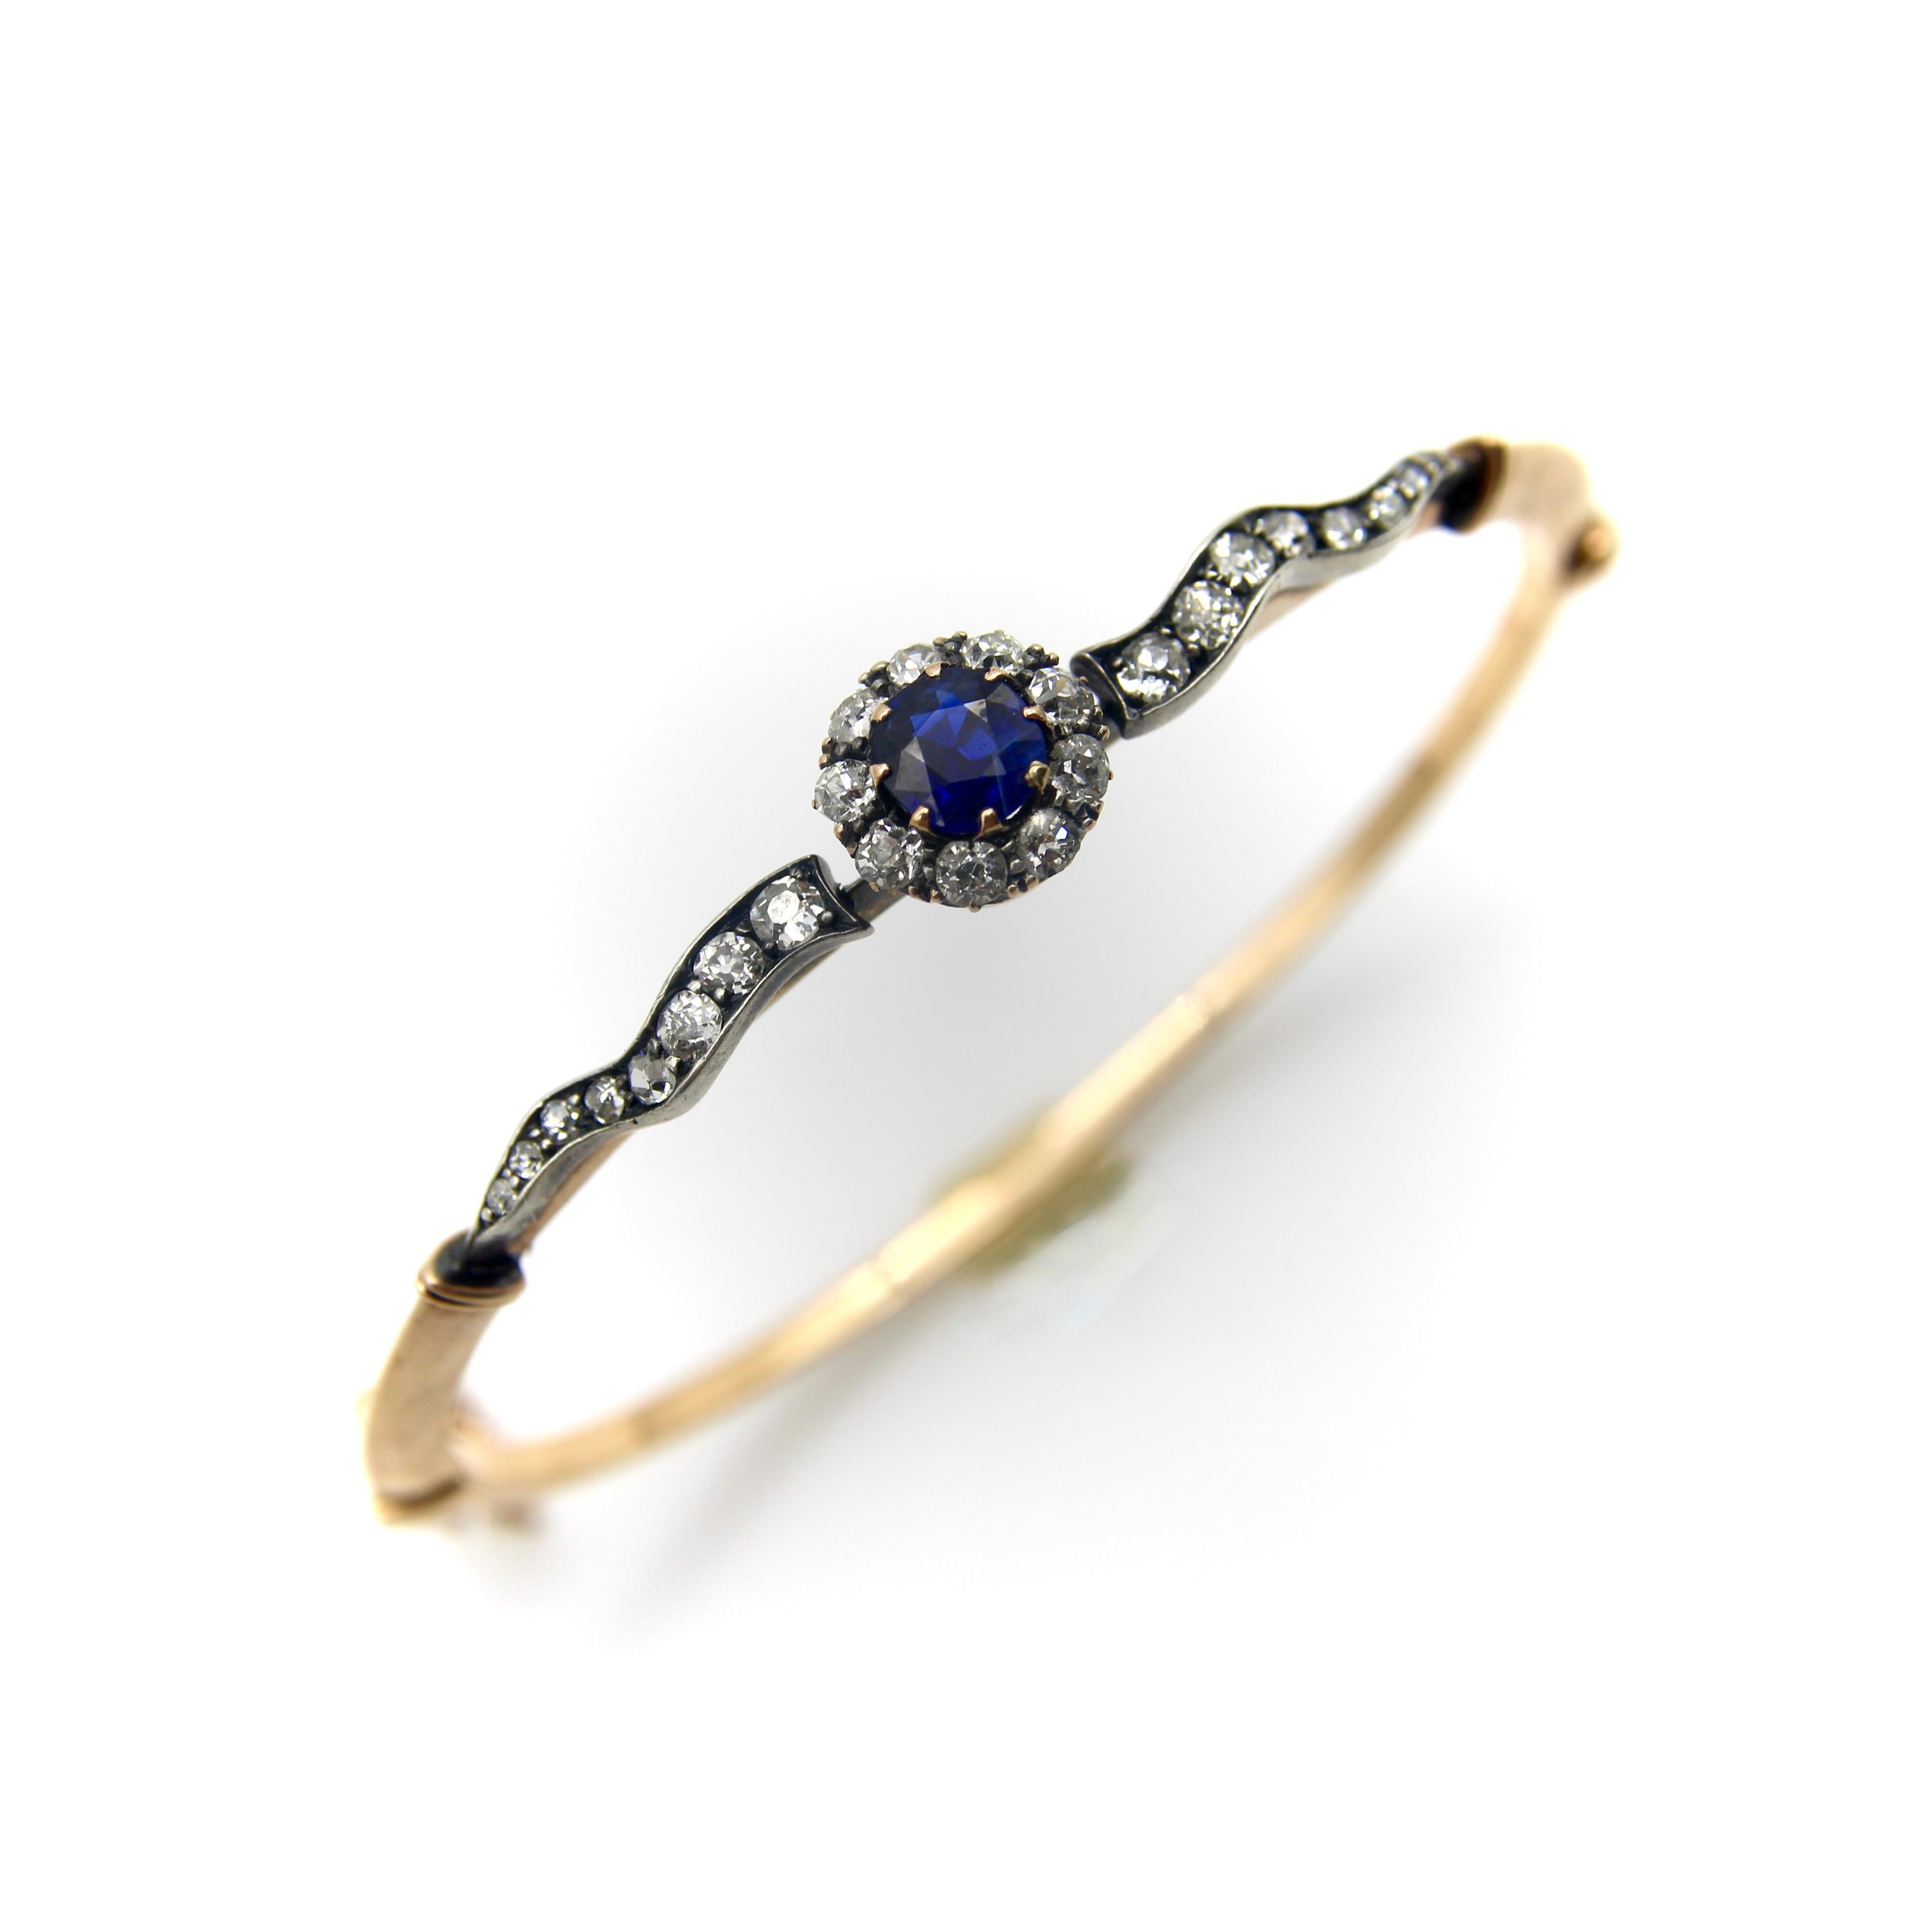 This elegant sapphire and diamond Victorian bracelet contains a saturated dark blue sapphire surrounded by Old Mine Cut diamonds. It is flanked by diamond encrusted wavy banner-like ribbons along the band. The central element is reminiscent of a